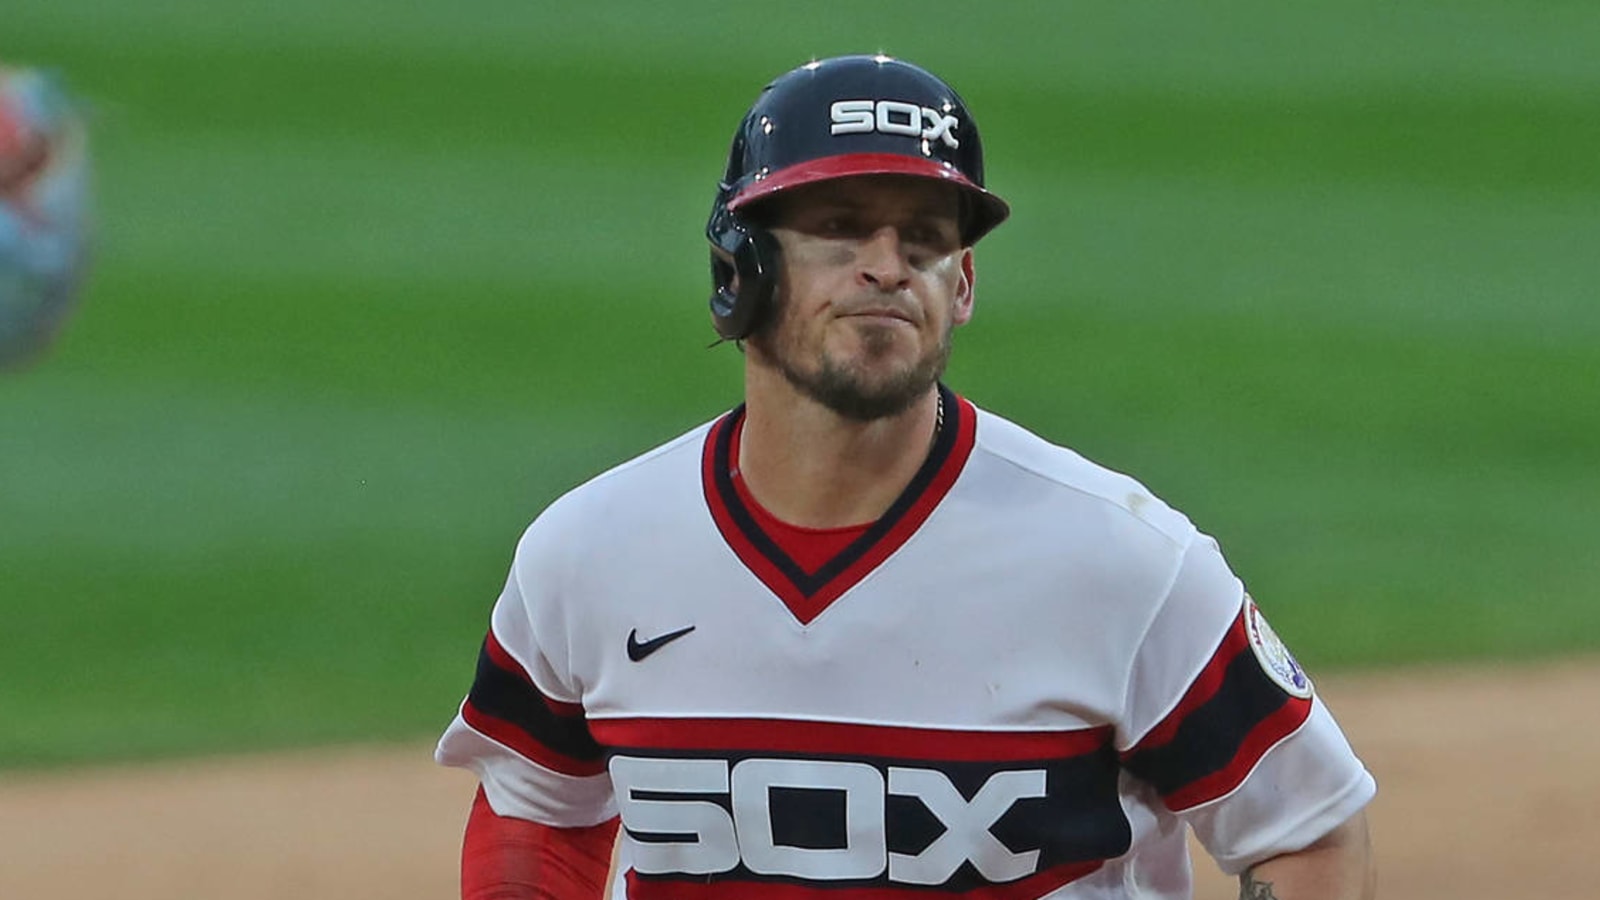 Yasmani Grandal signs with White Sox after big year with Brewers